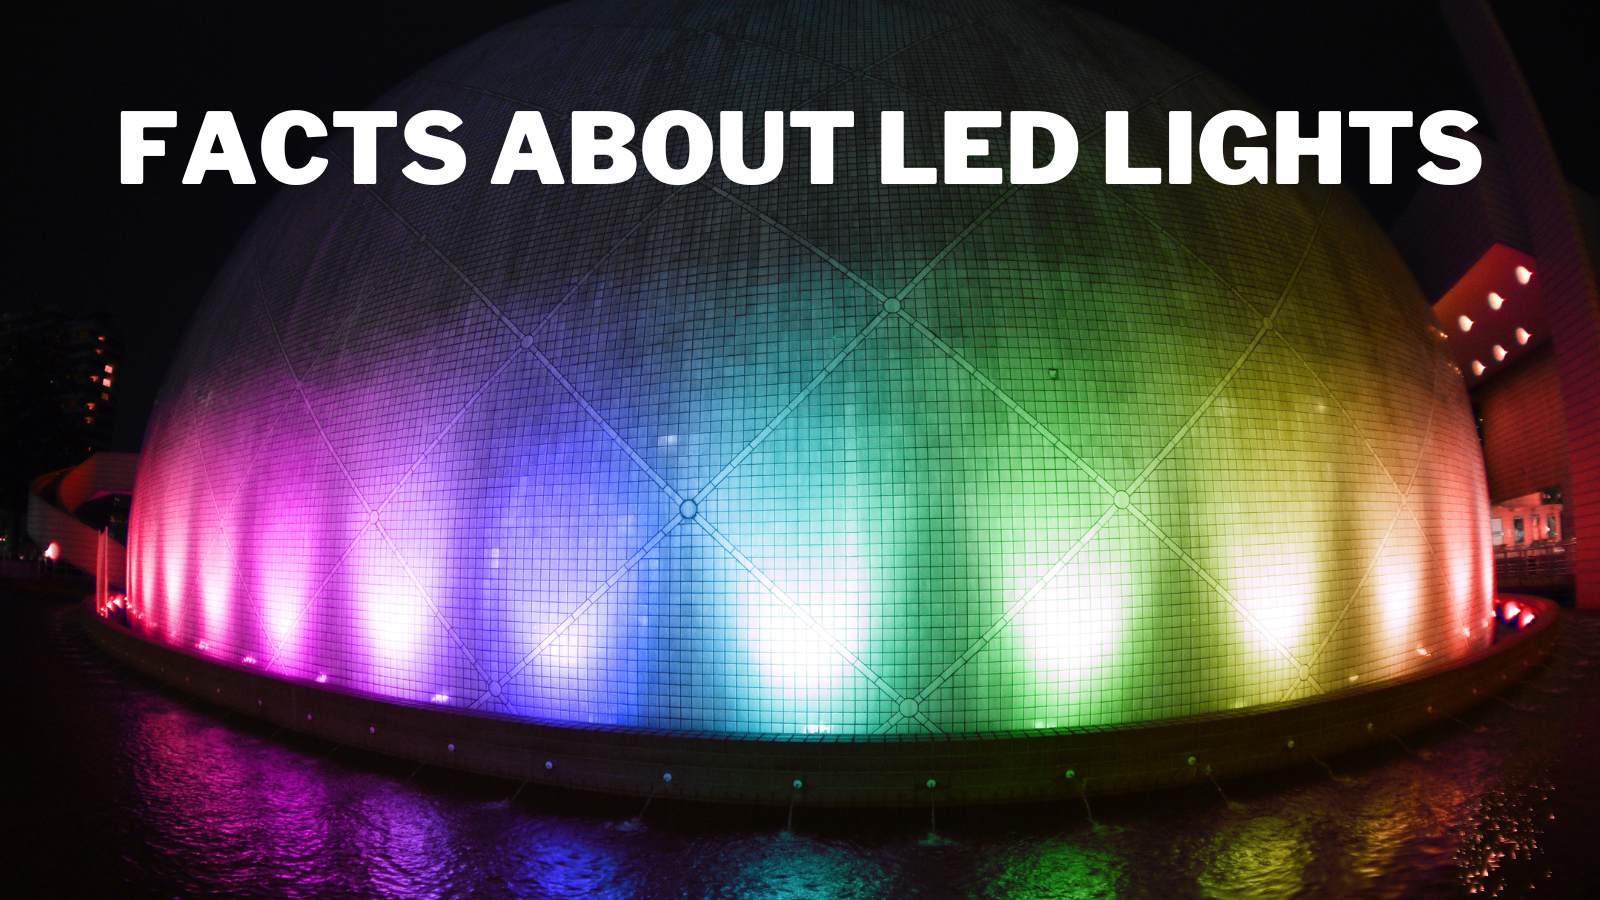 Facts About LED Lights